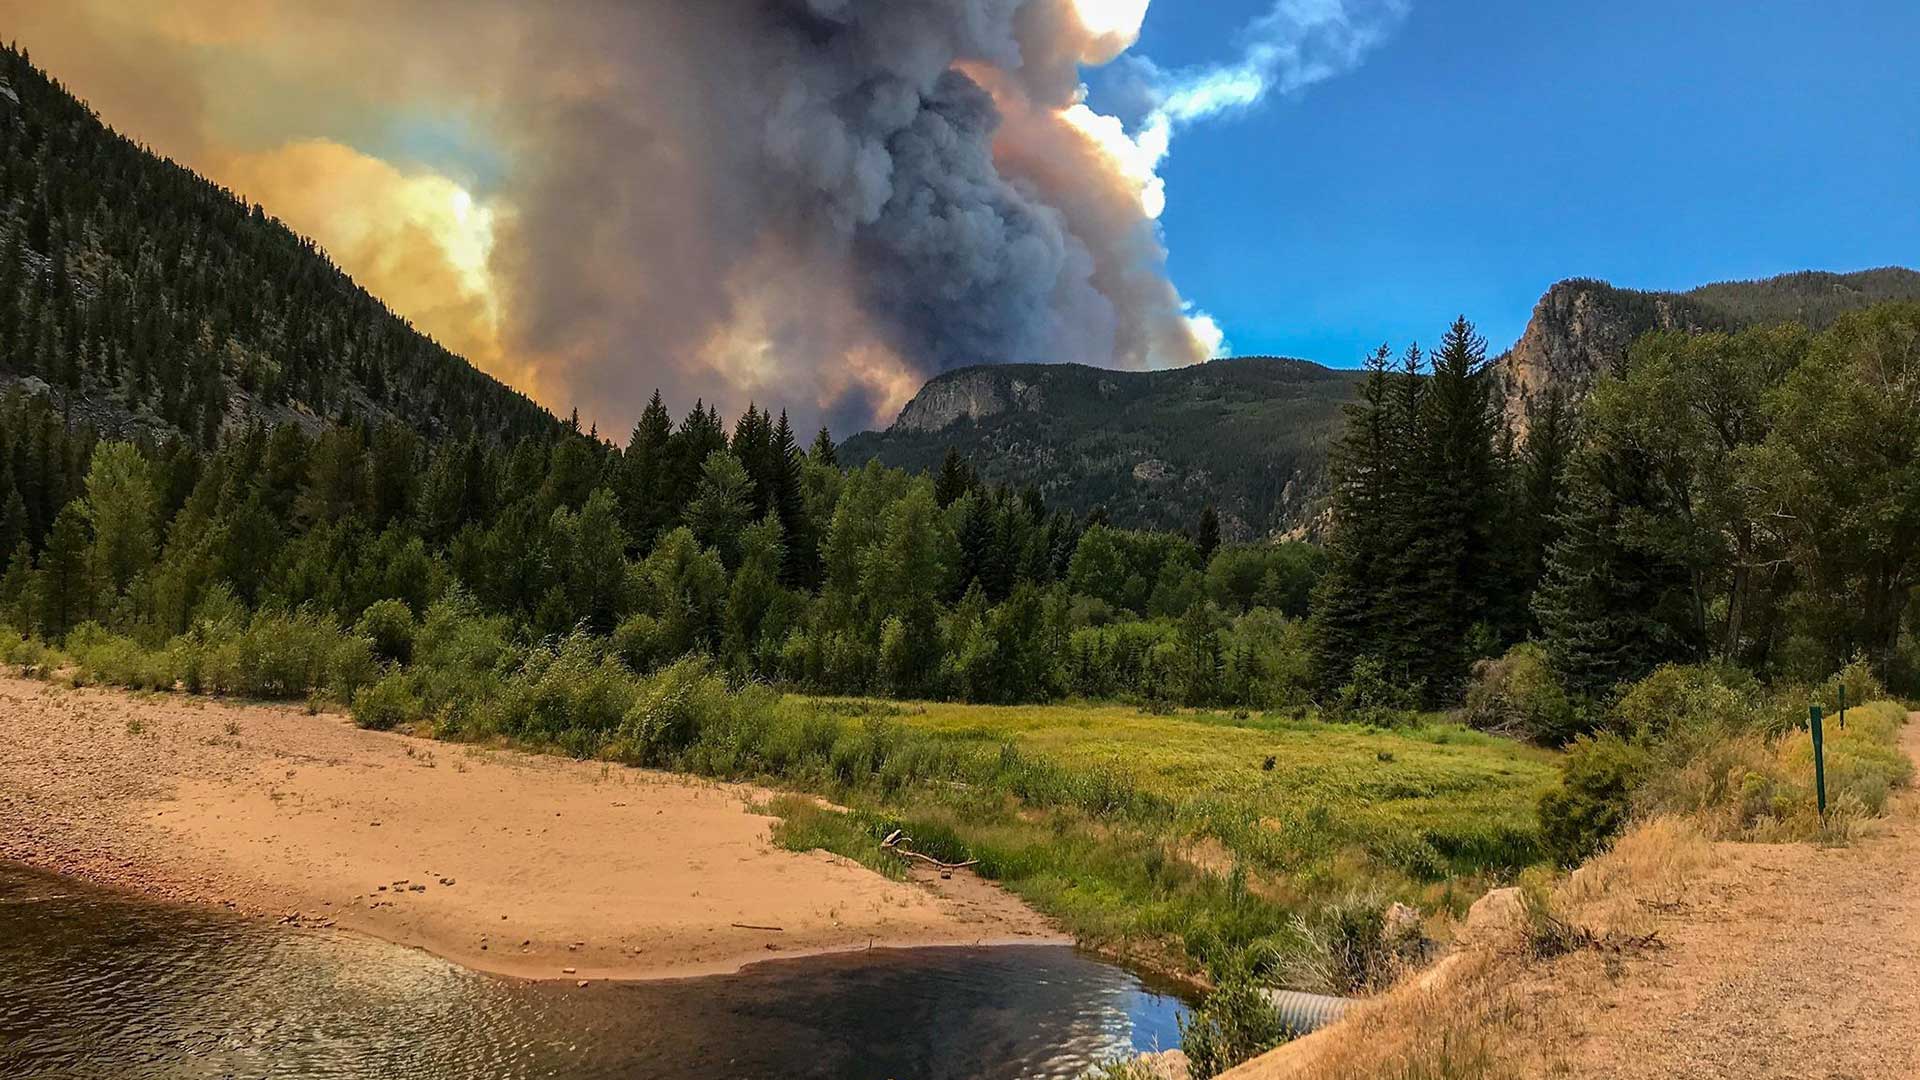 Between the High Park and Cameron Peak Fires, a broad reach of the Poudre River’s watershed has burned within the last decade.